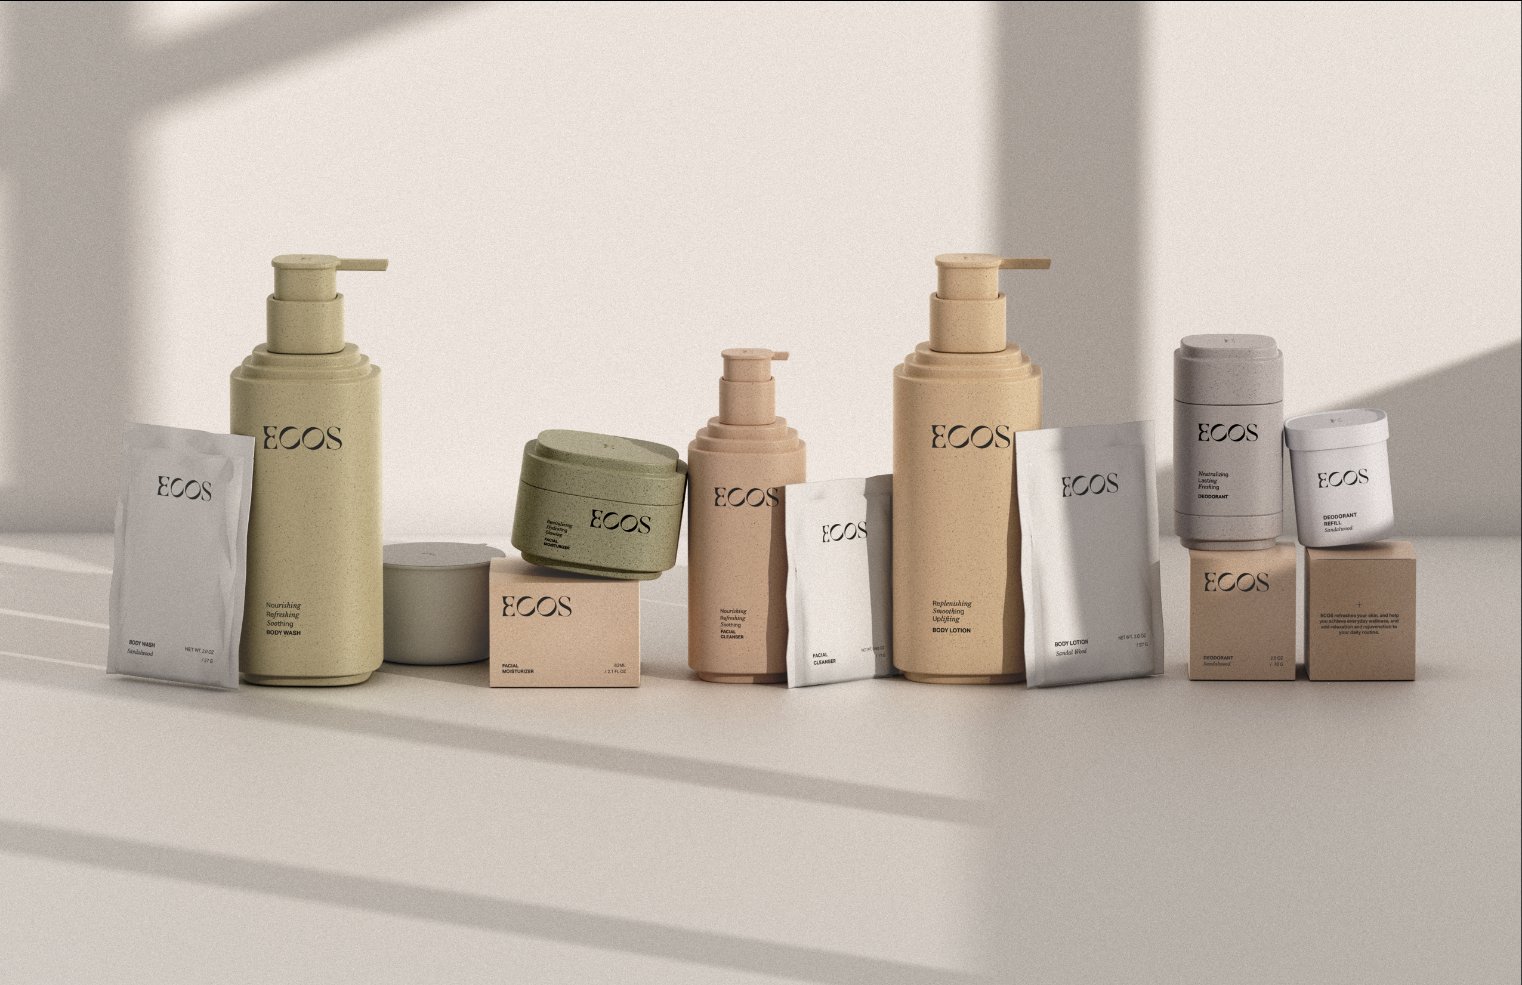 This Stylish Concept Imagines a Chic Minimalist Skincare Line for ECOS